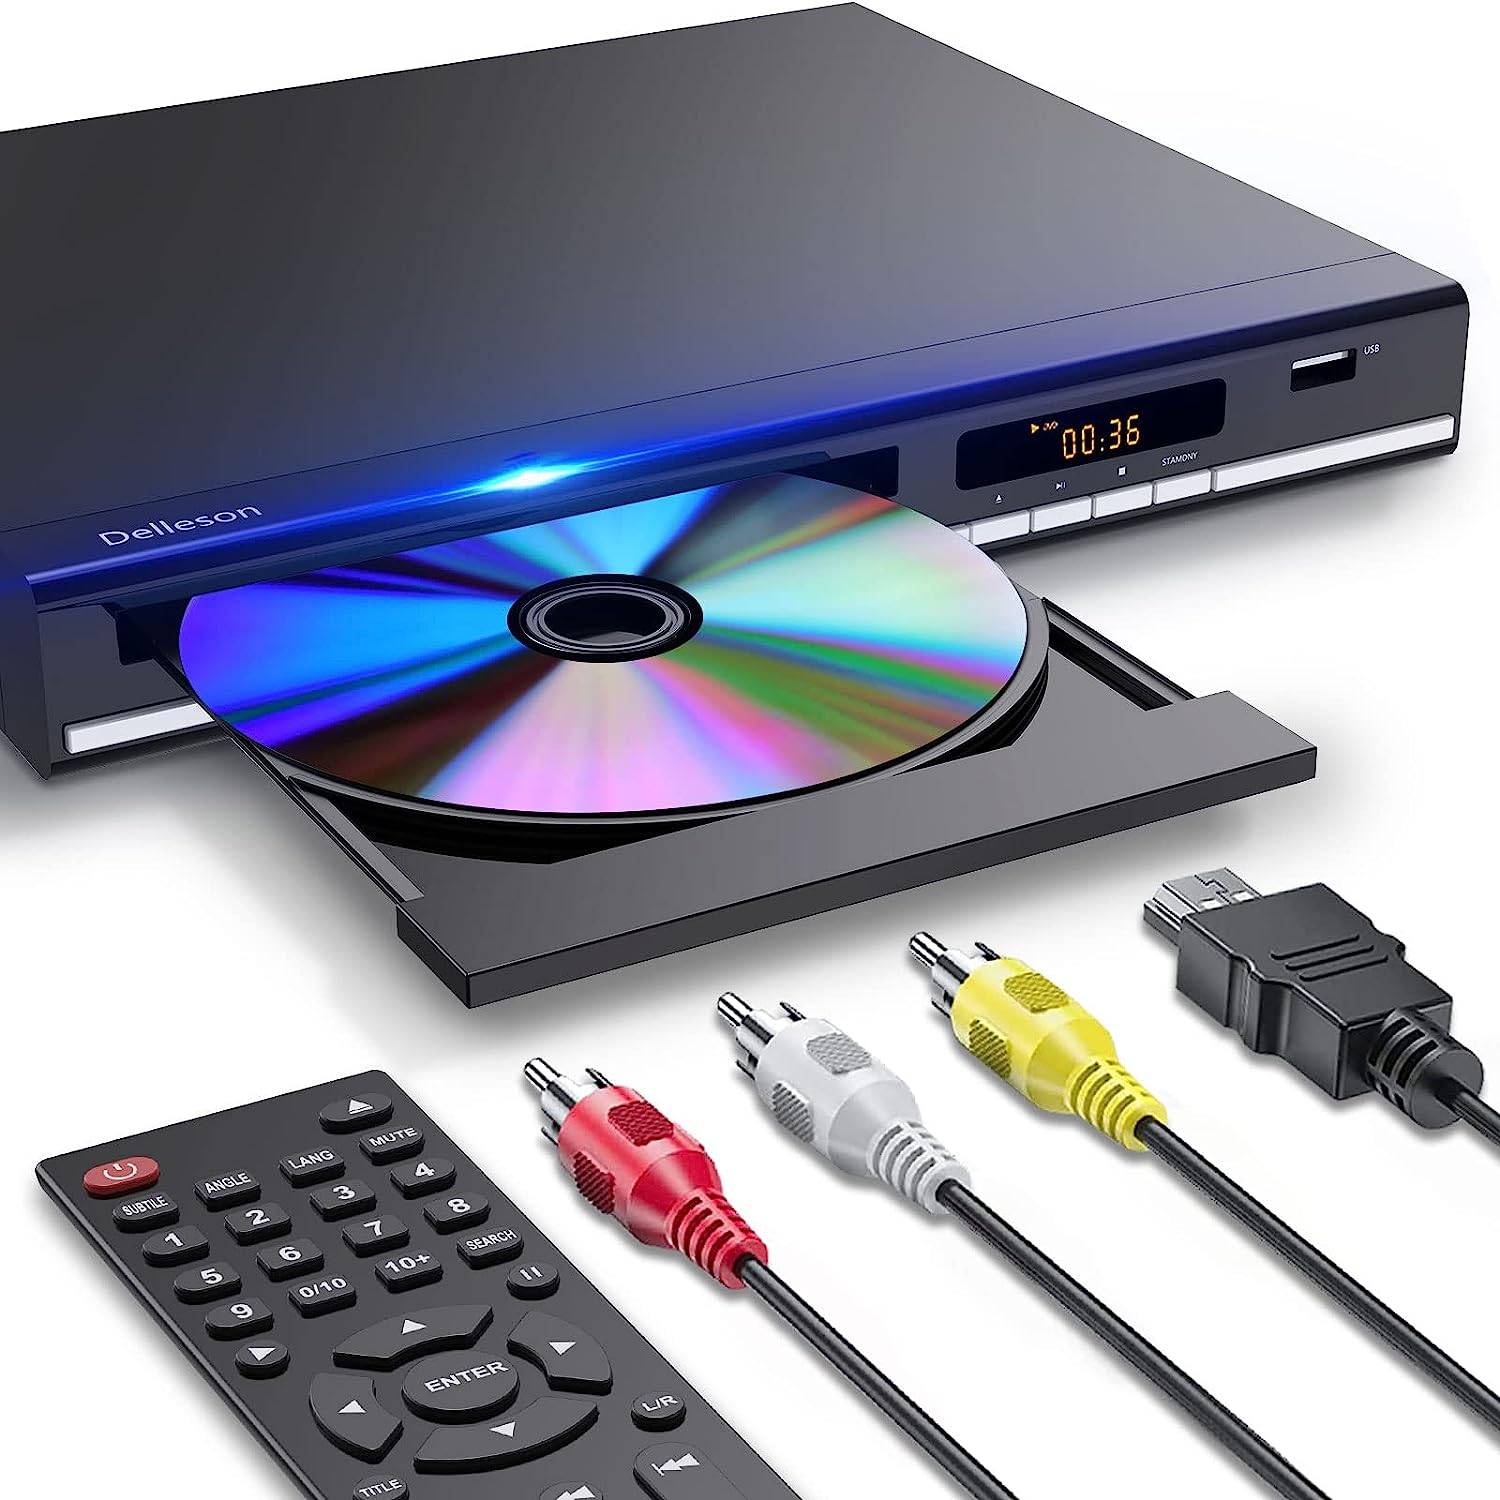  DVD Players for TV with HDMI, DVD Players That Play